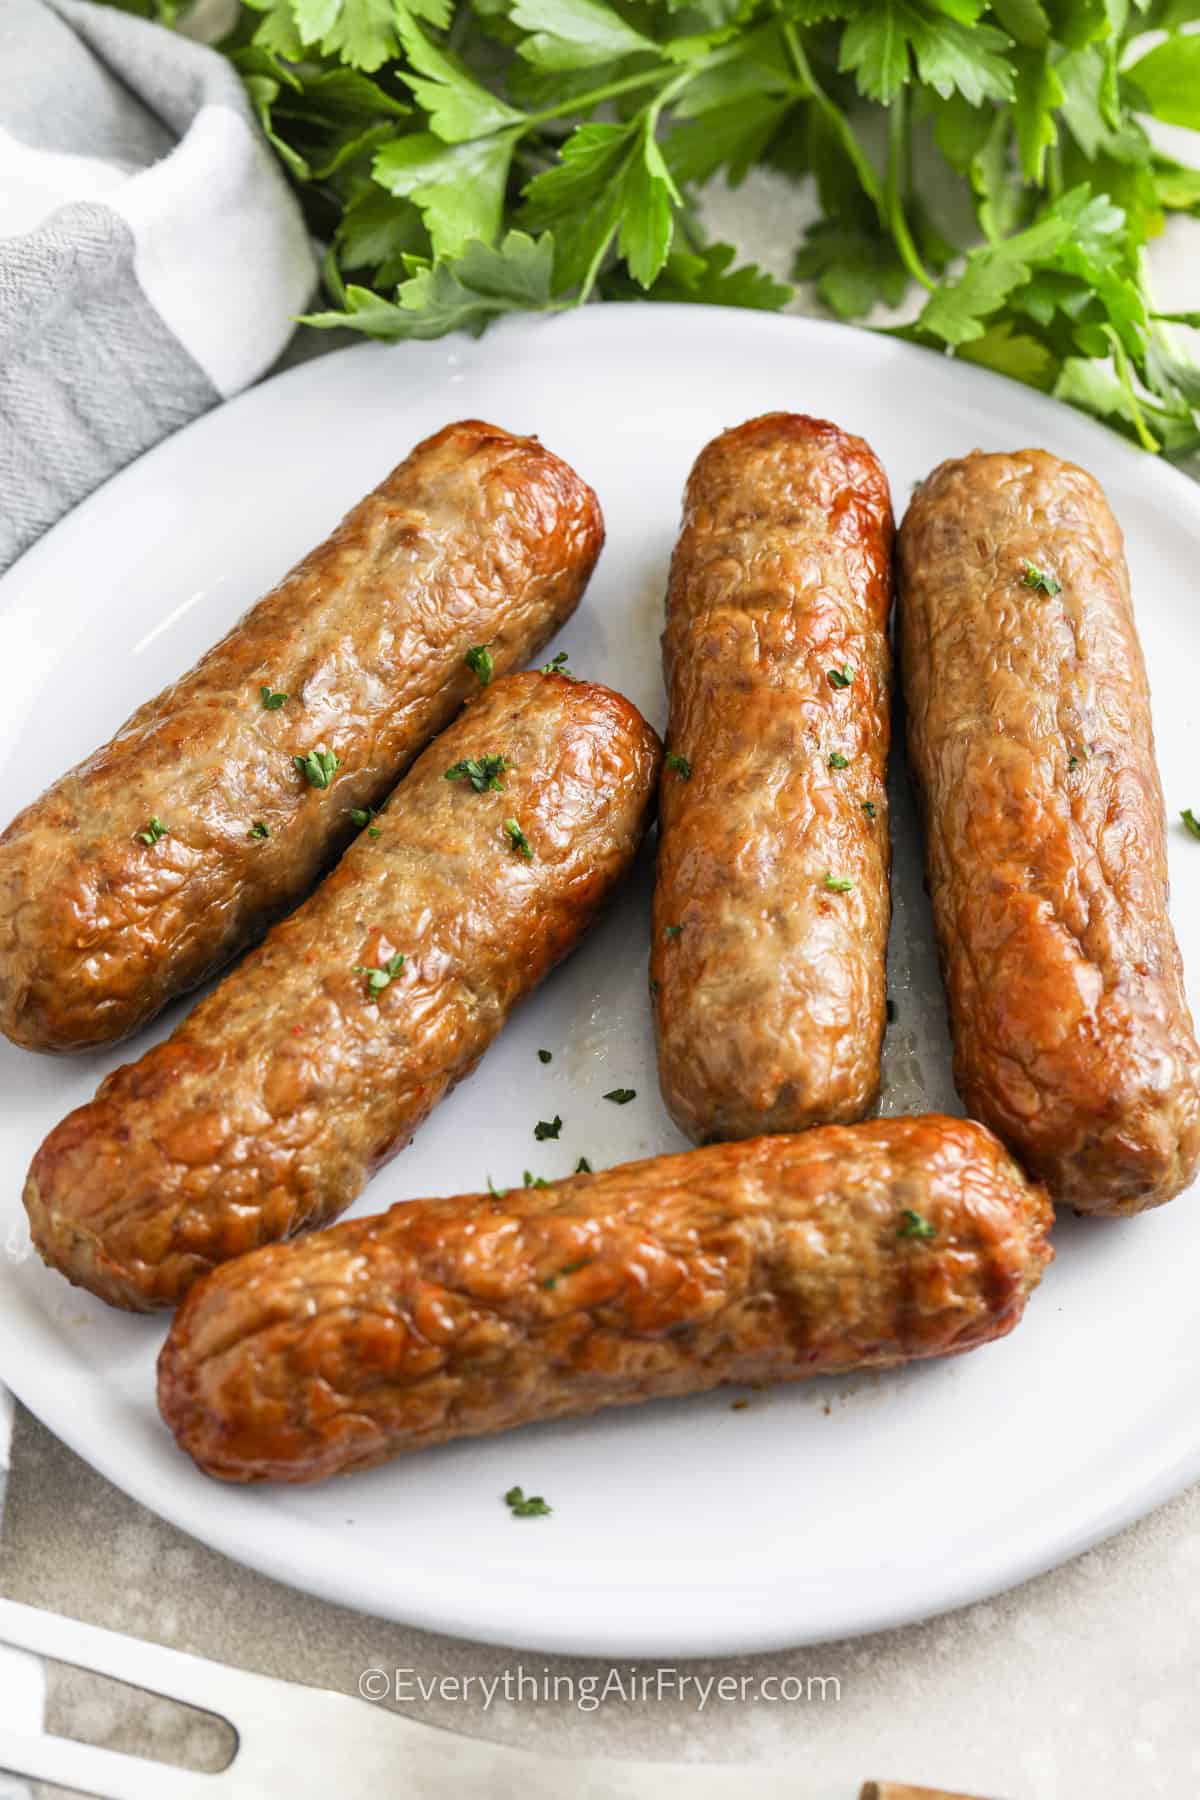 Air fryer chicken sausage on a plate with parsley as garnish